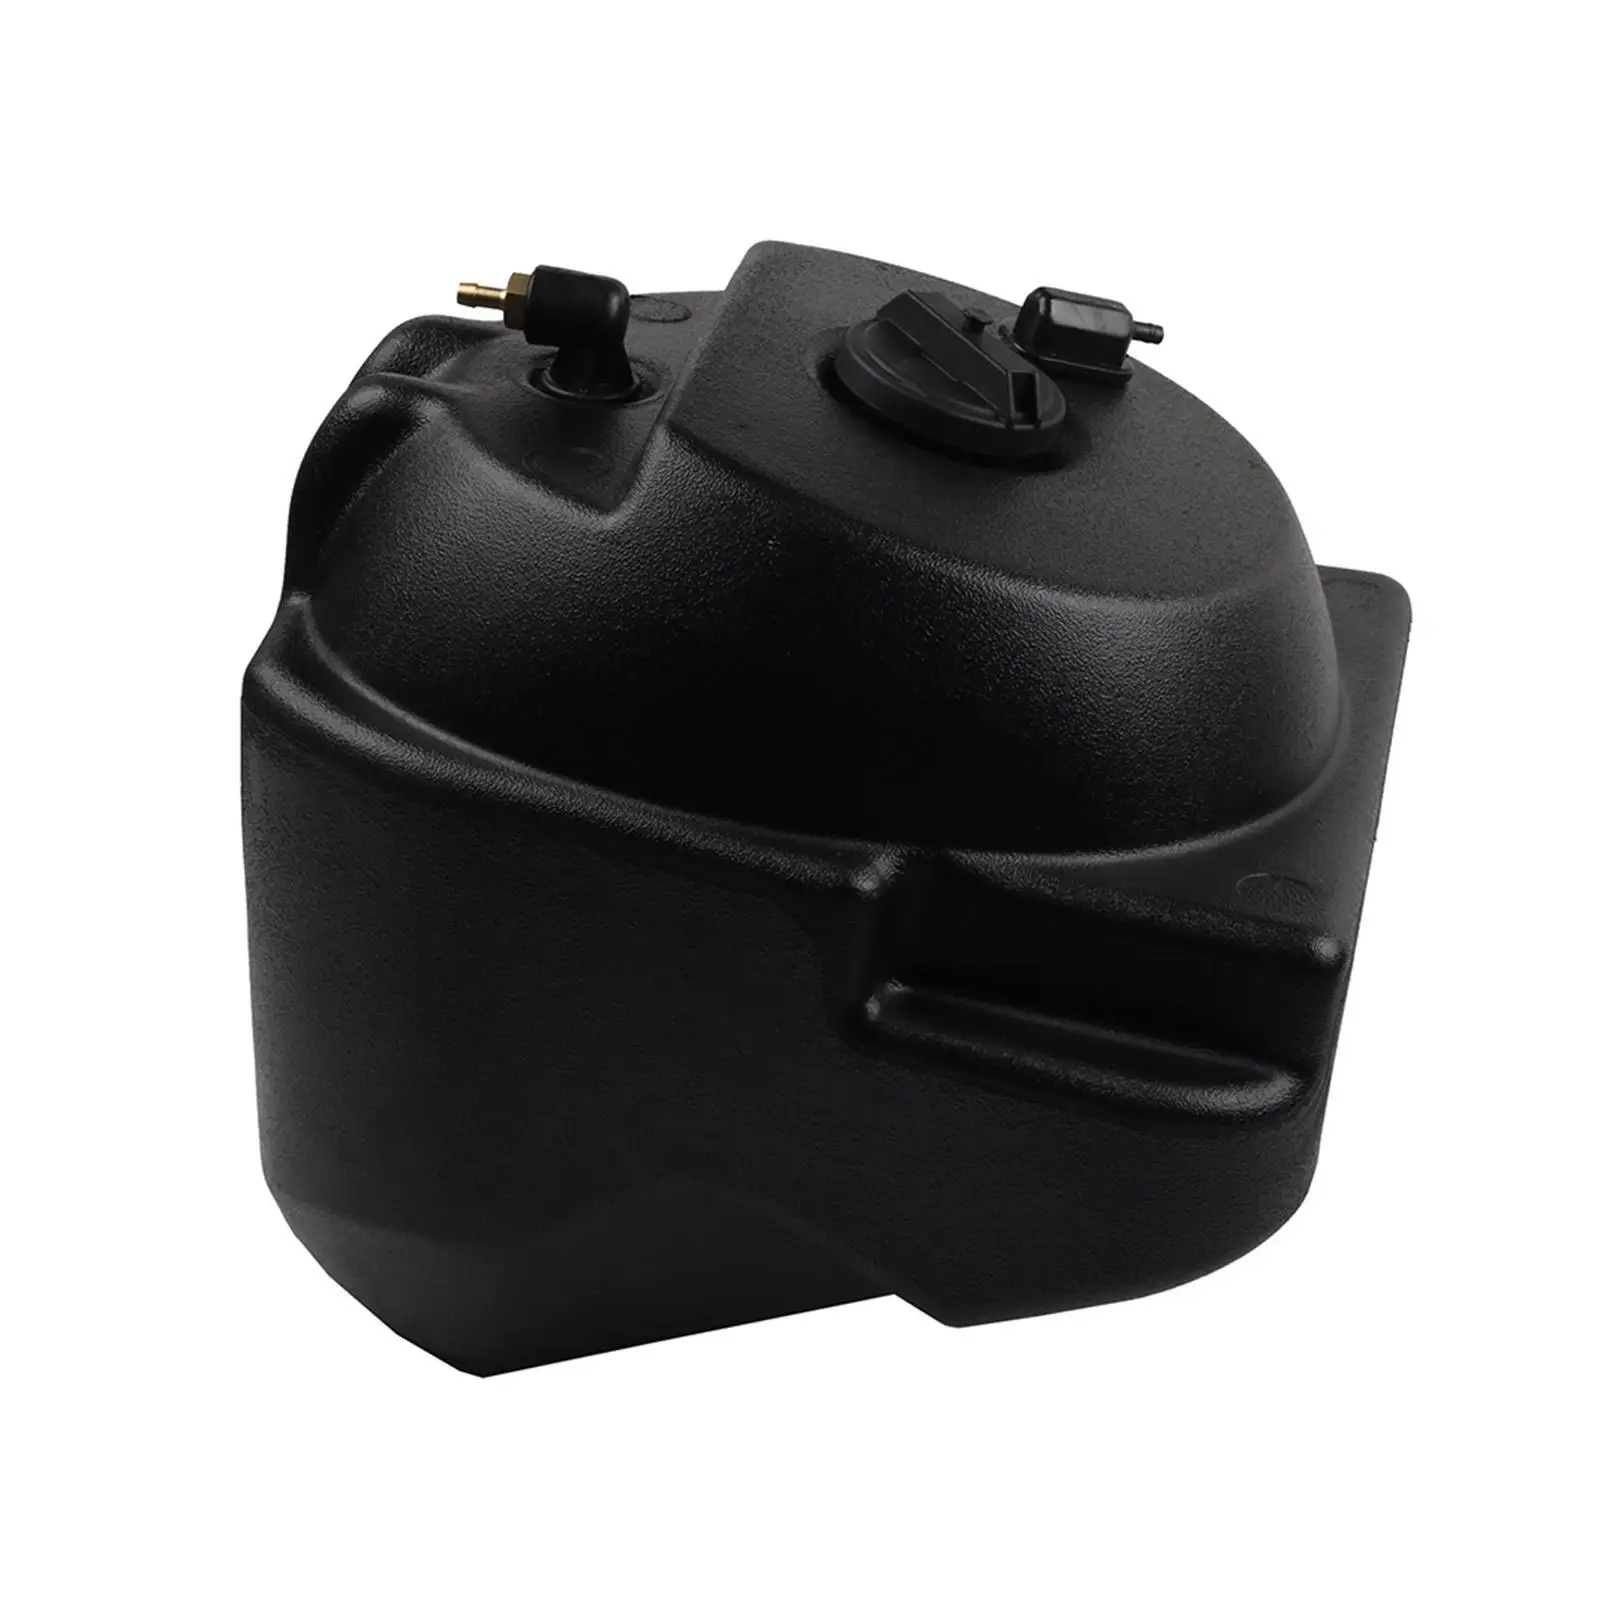 Auxiliary Fuel Tank Oil Tank Fuel Tank Oil Box for Yamaha Xmax250